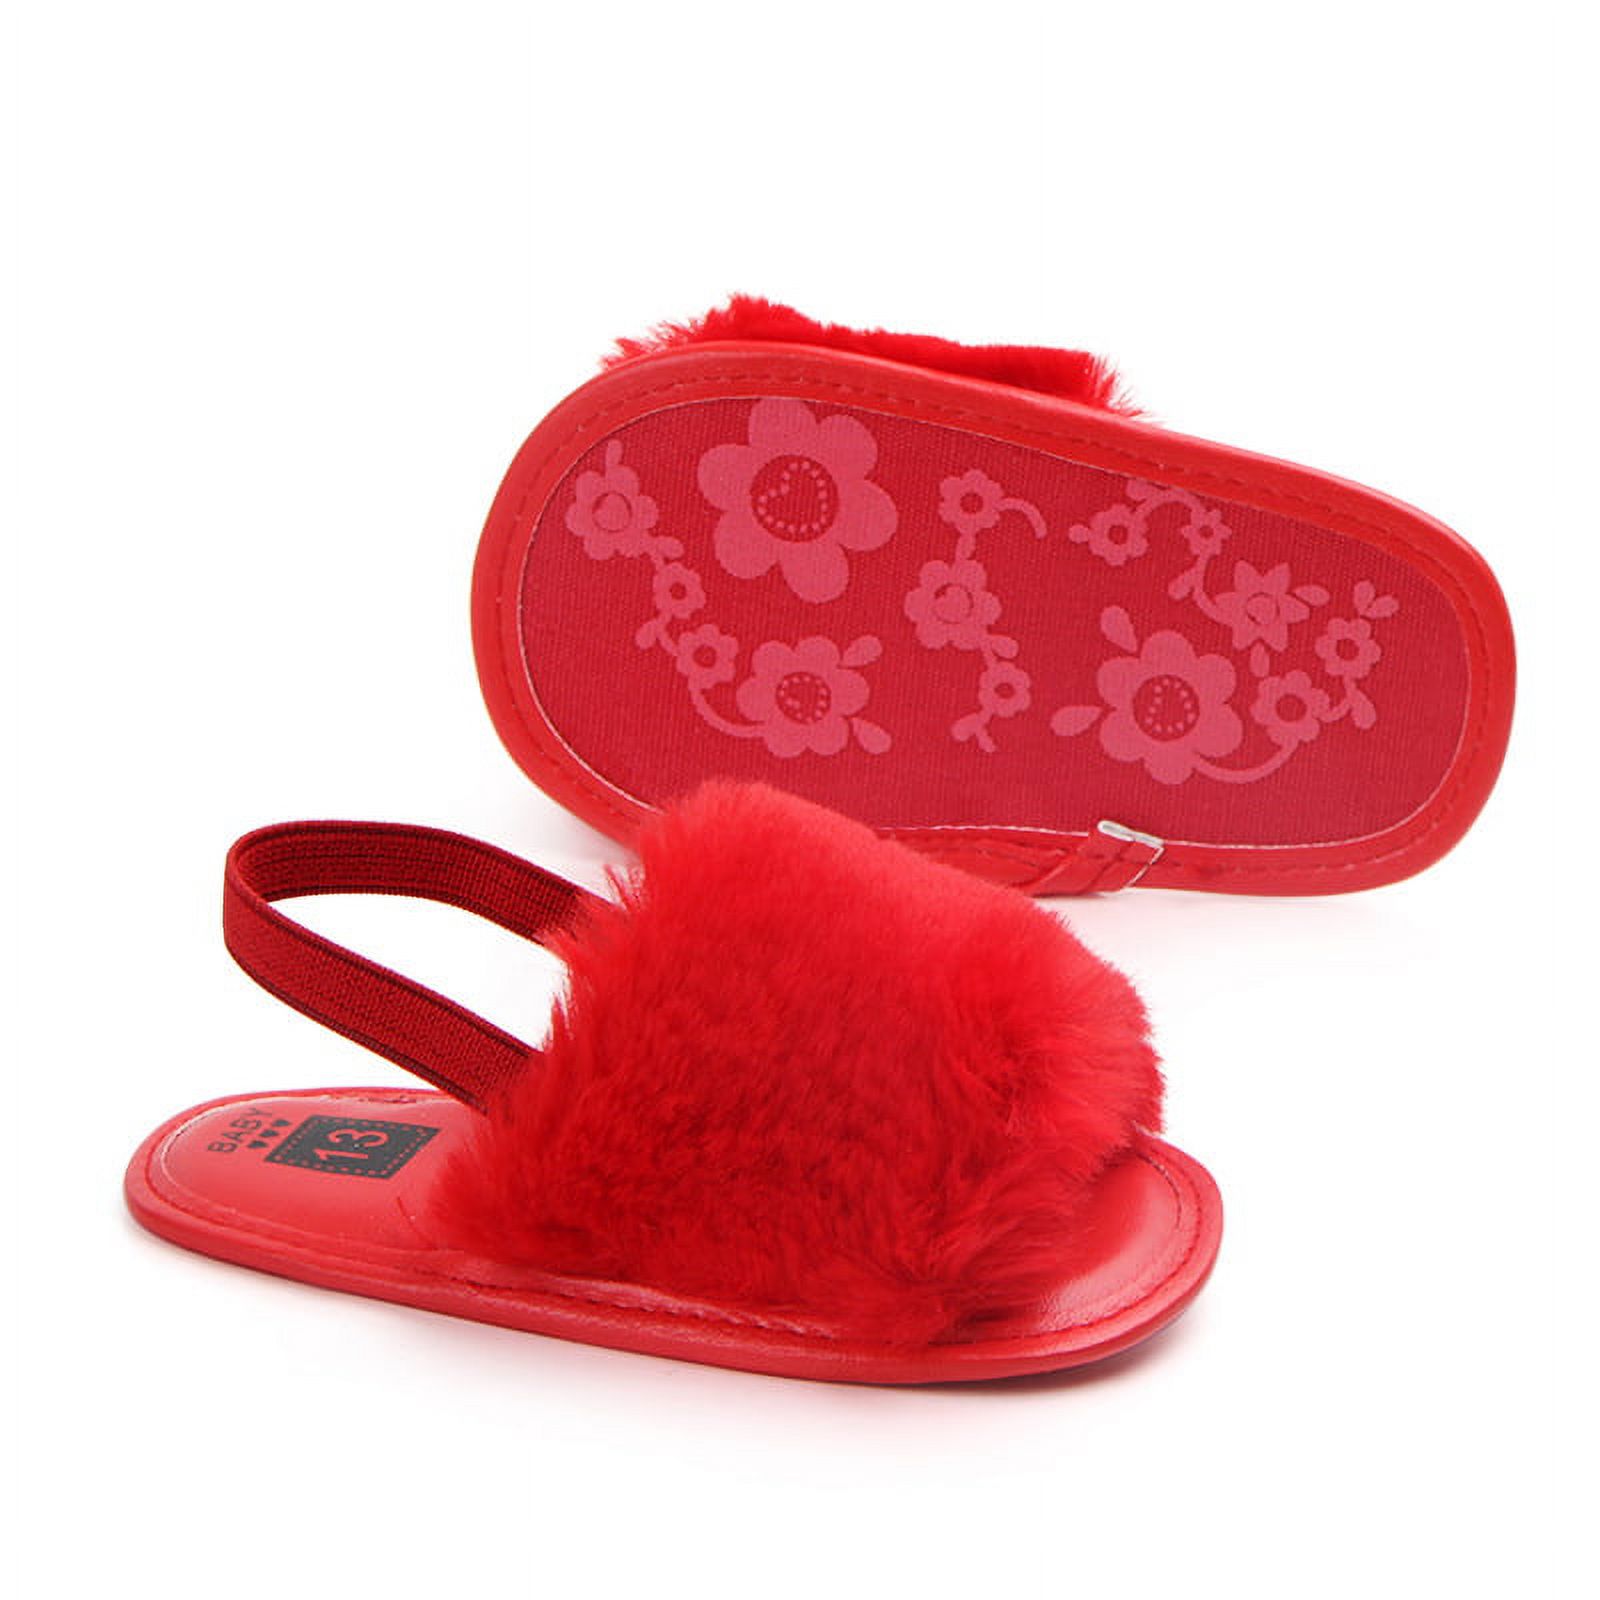 Baby Girls Summer Sandals Non Slip Soft Sole Infant Dress Shoes Newborn Toddler Furry Fur First Walker Crib Shoes House Slipper - image 4 of 4